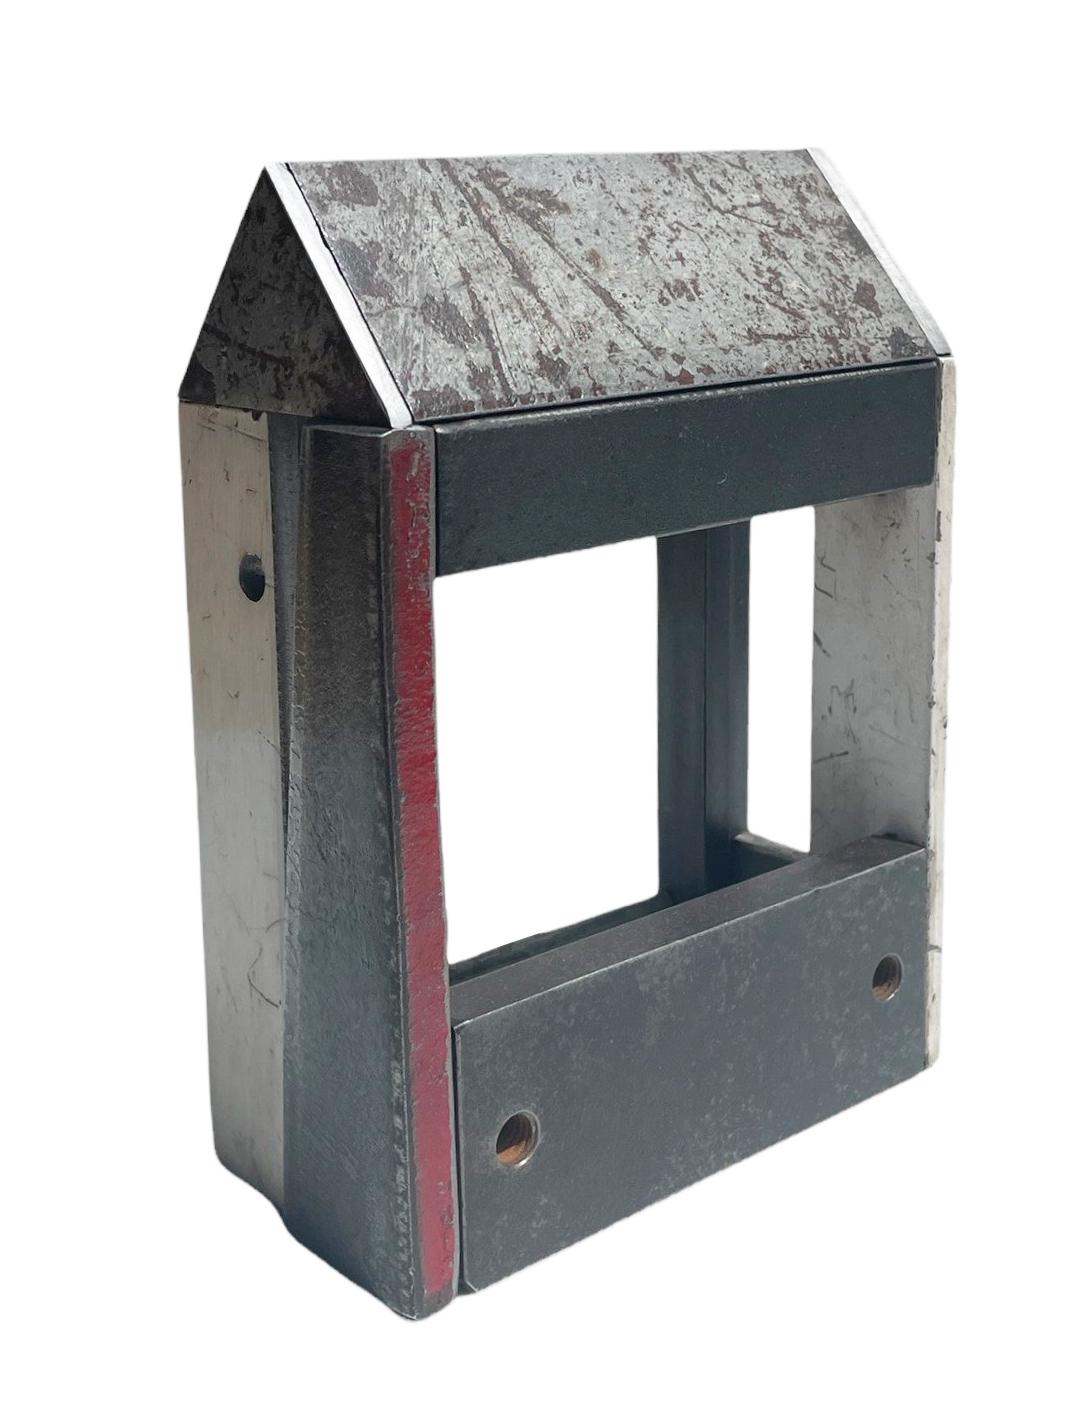 American Jim Rose Barn House Structure, Welded Steel Sculpture Made with Salvaged Steel